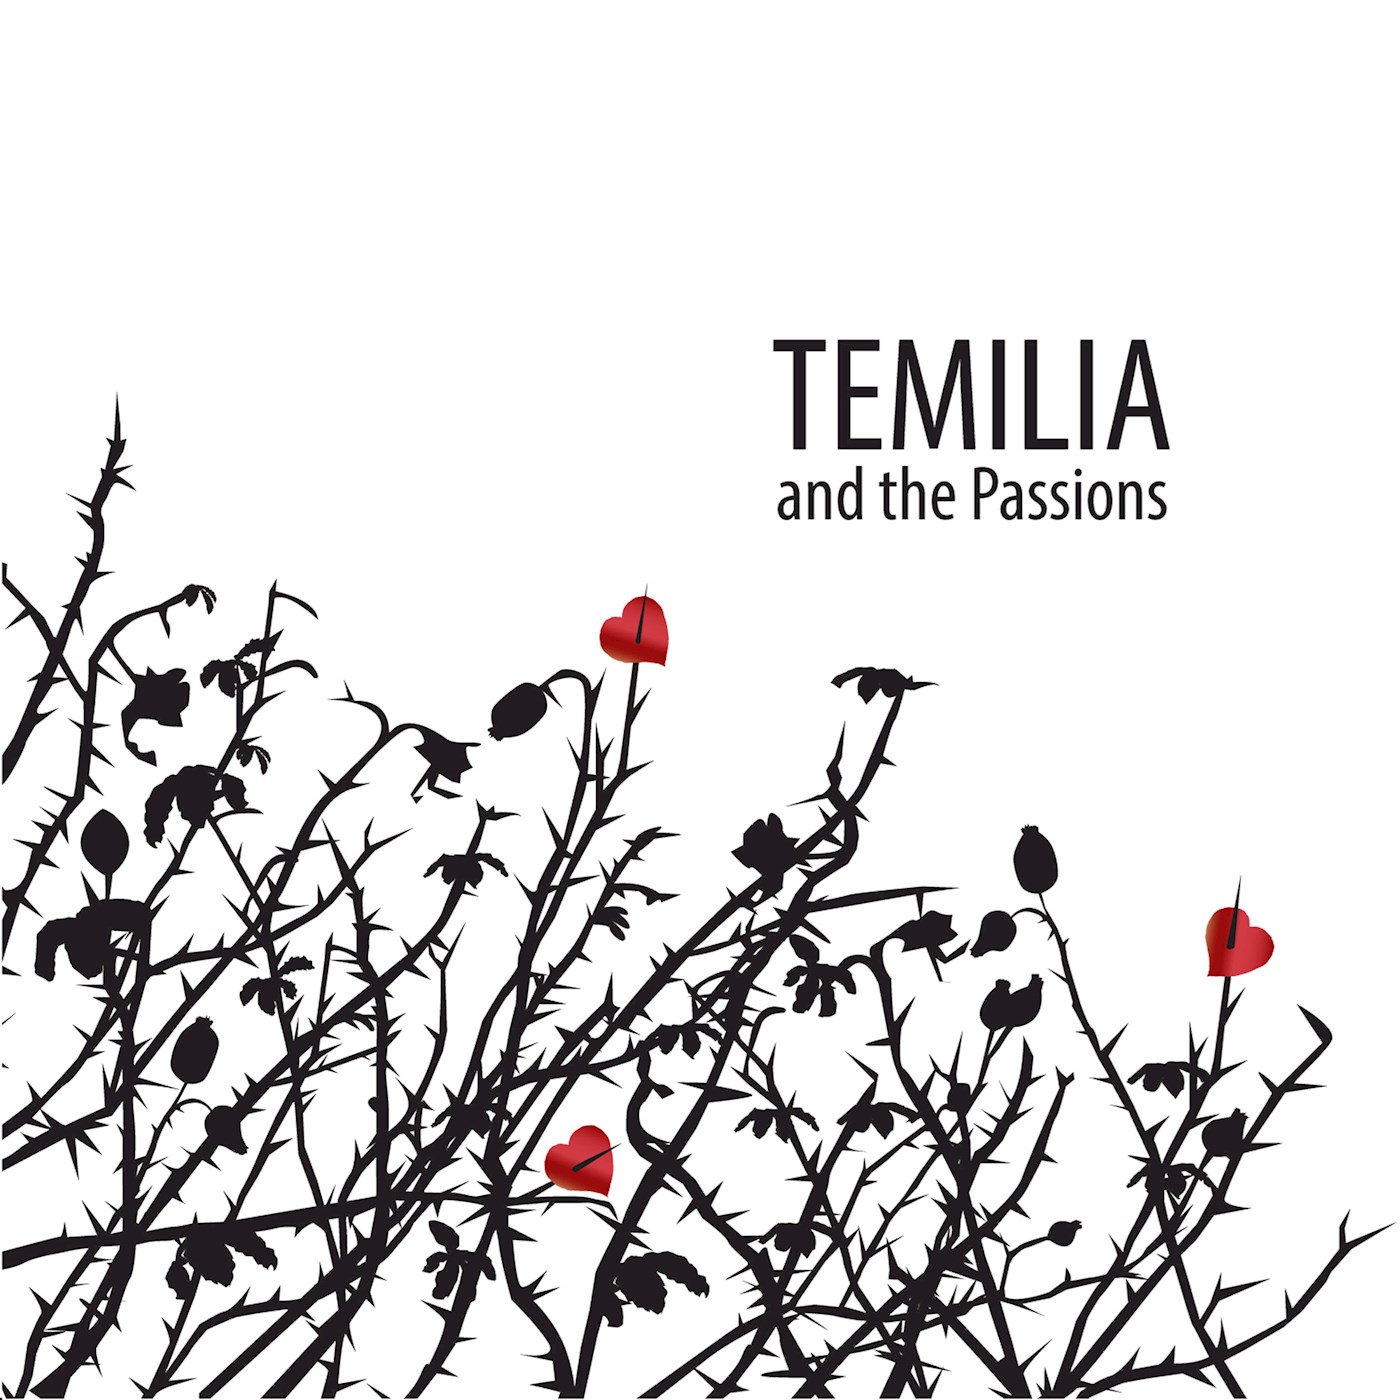 Temilia and the Passions